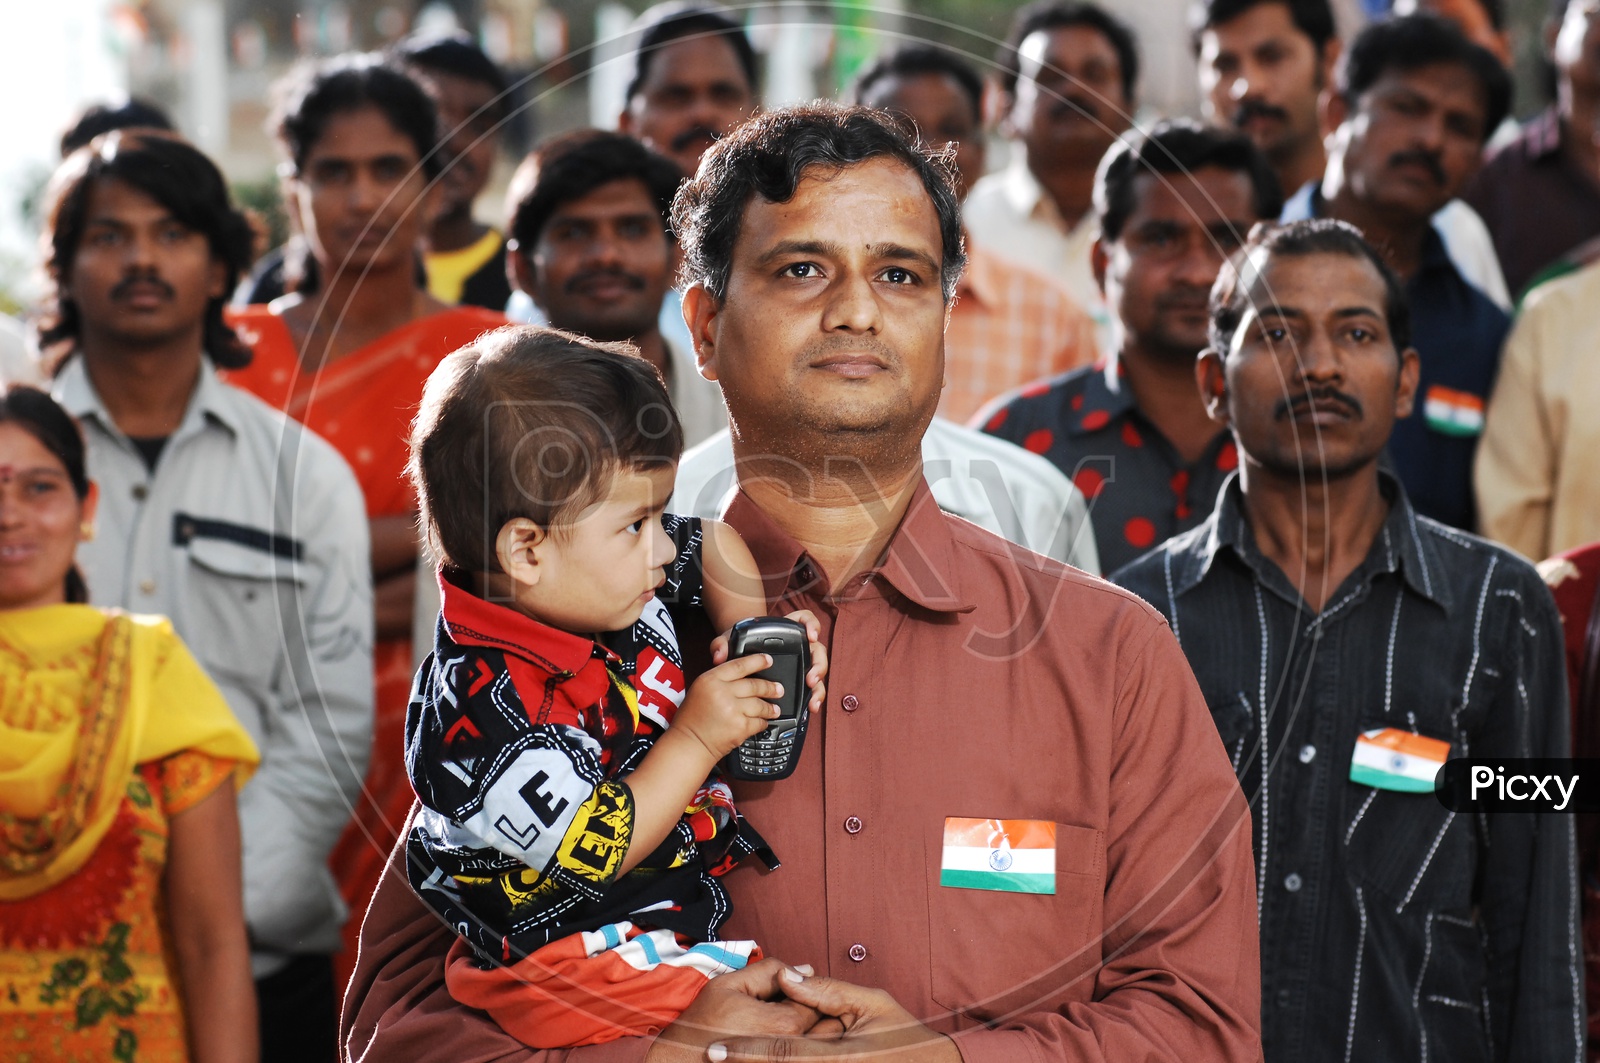 Father carrying his child during national anthem